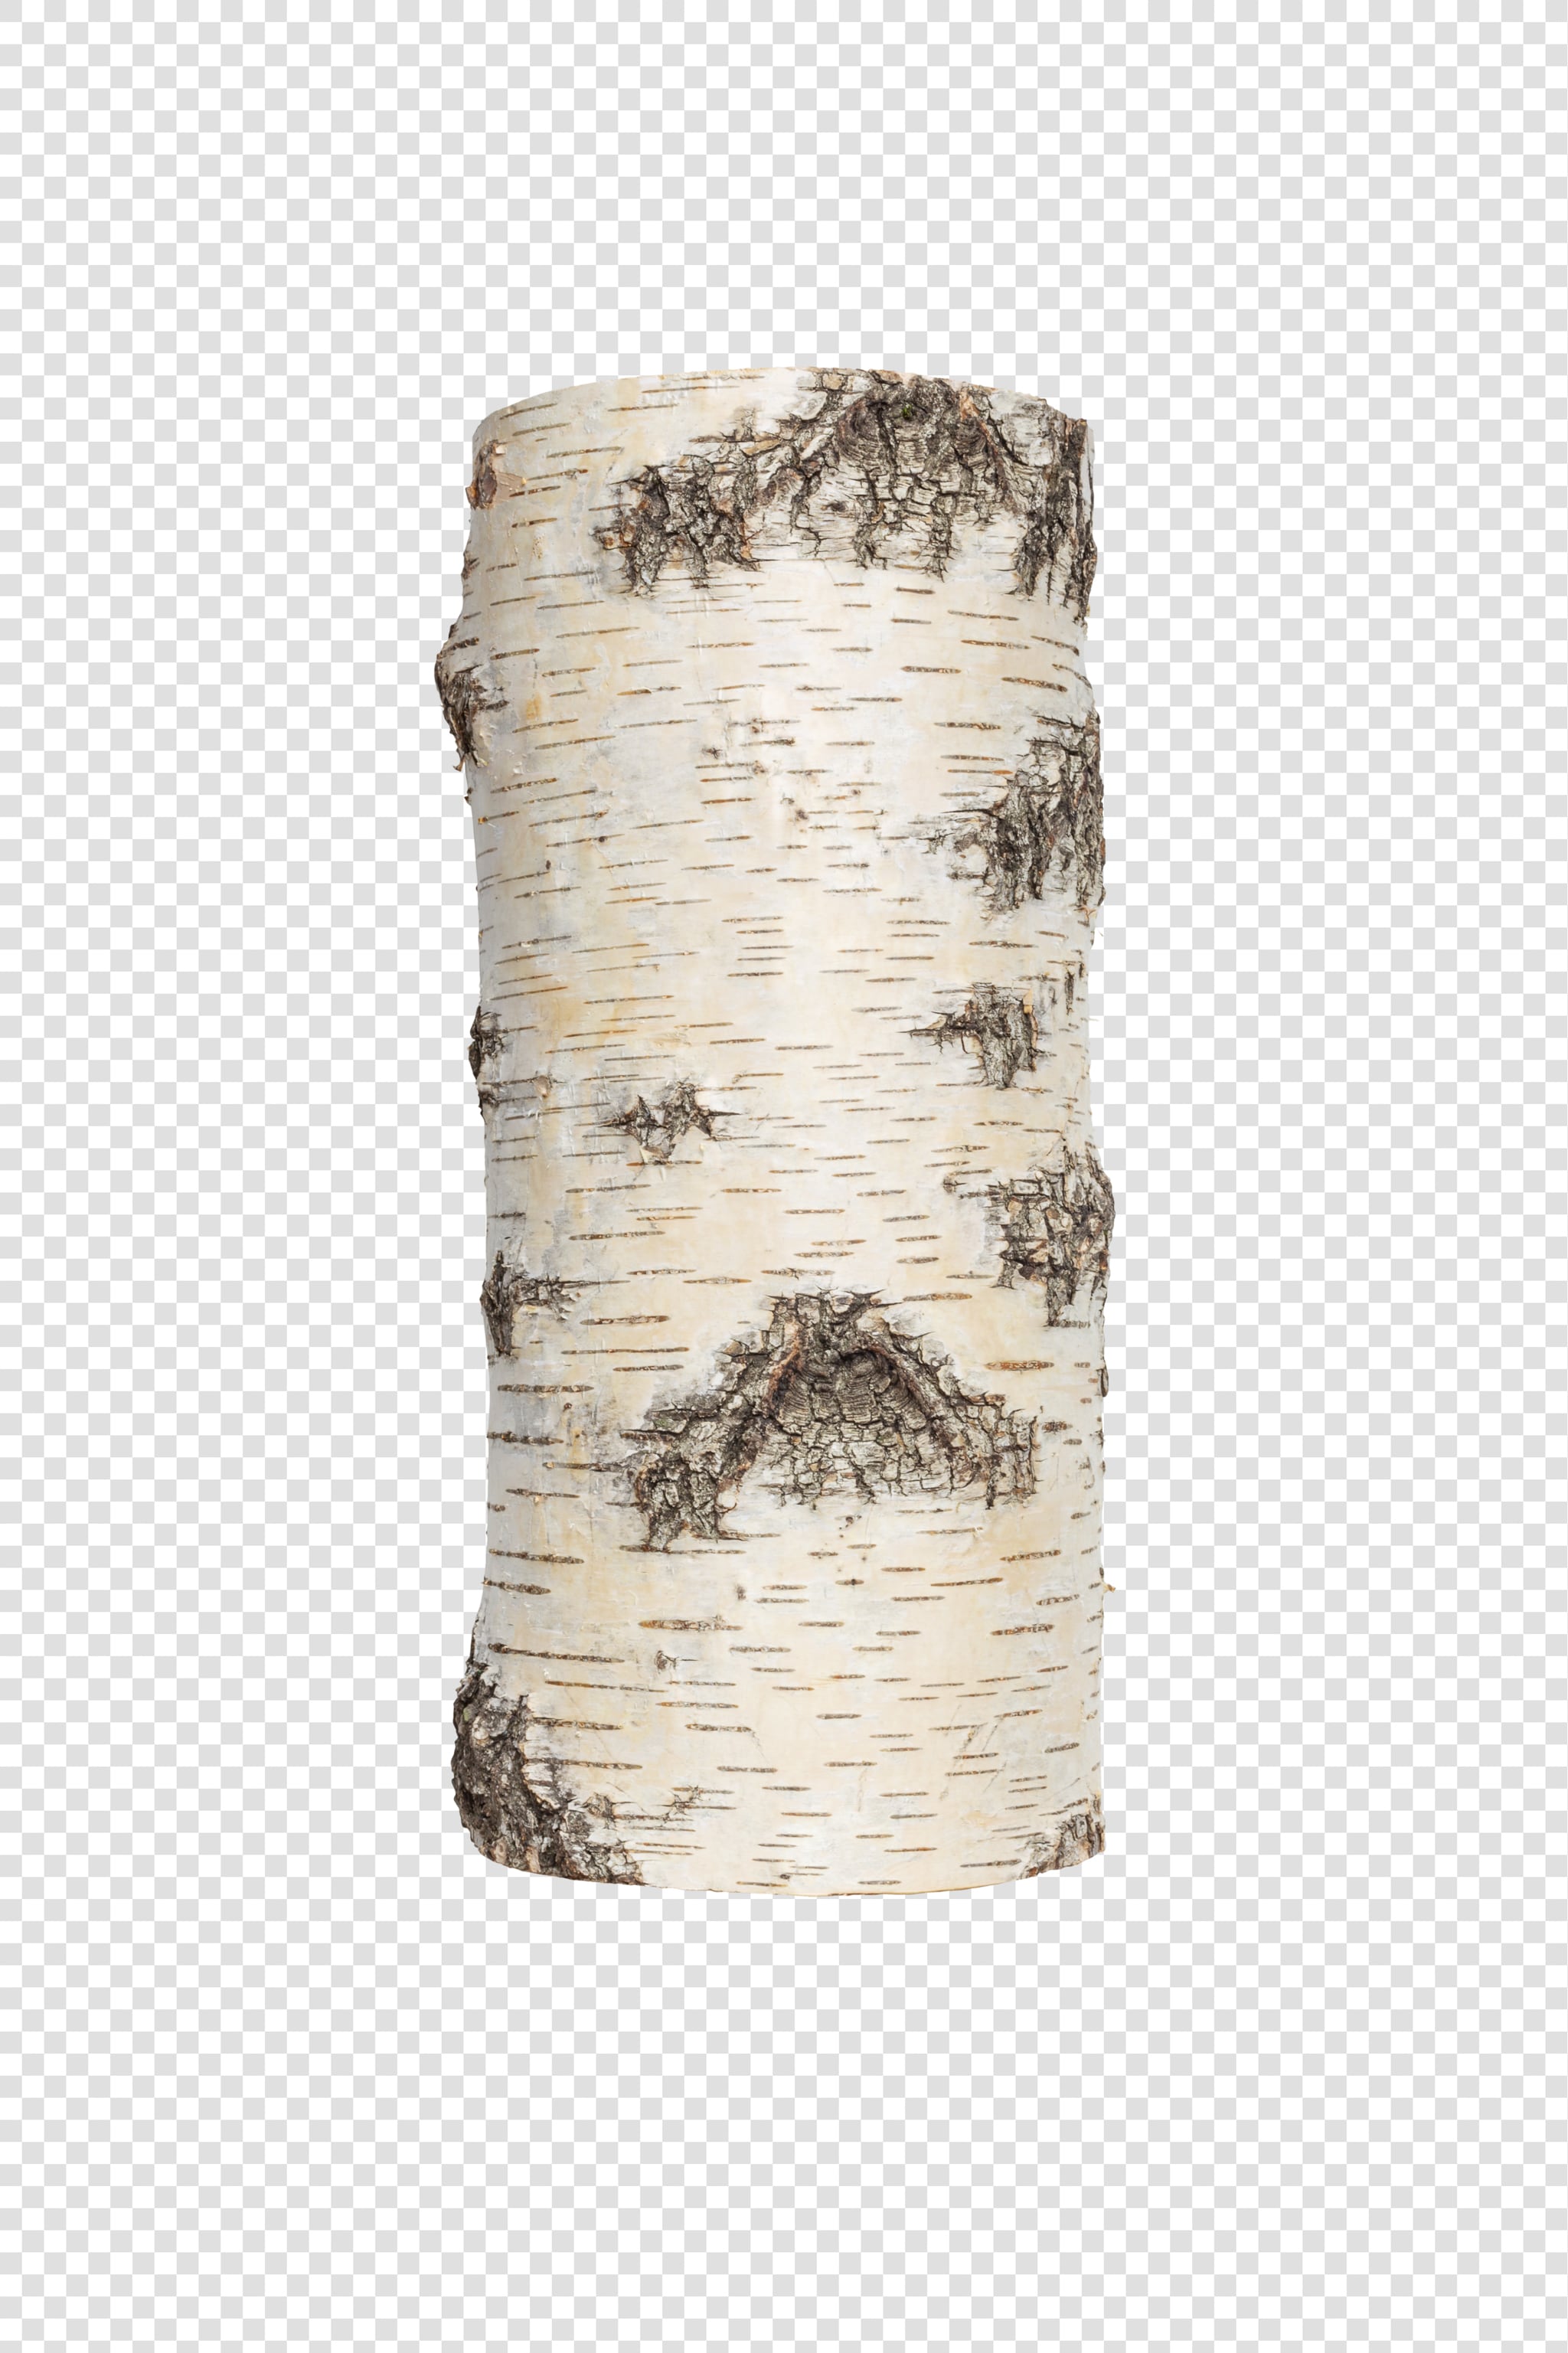 Clean Isolated PSD image of Birch log on transparent background with separated shadow